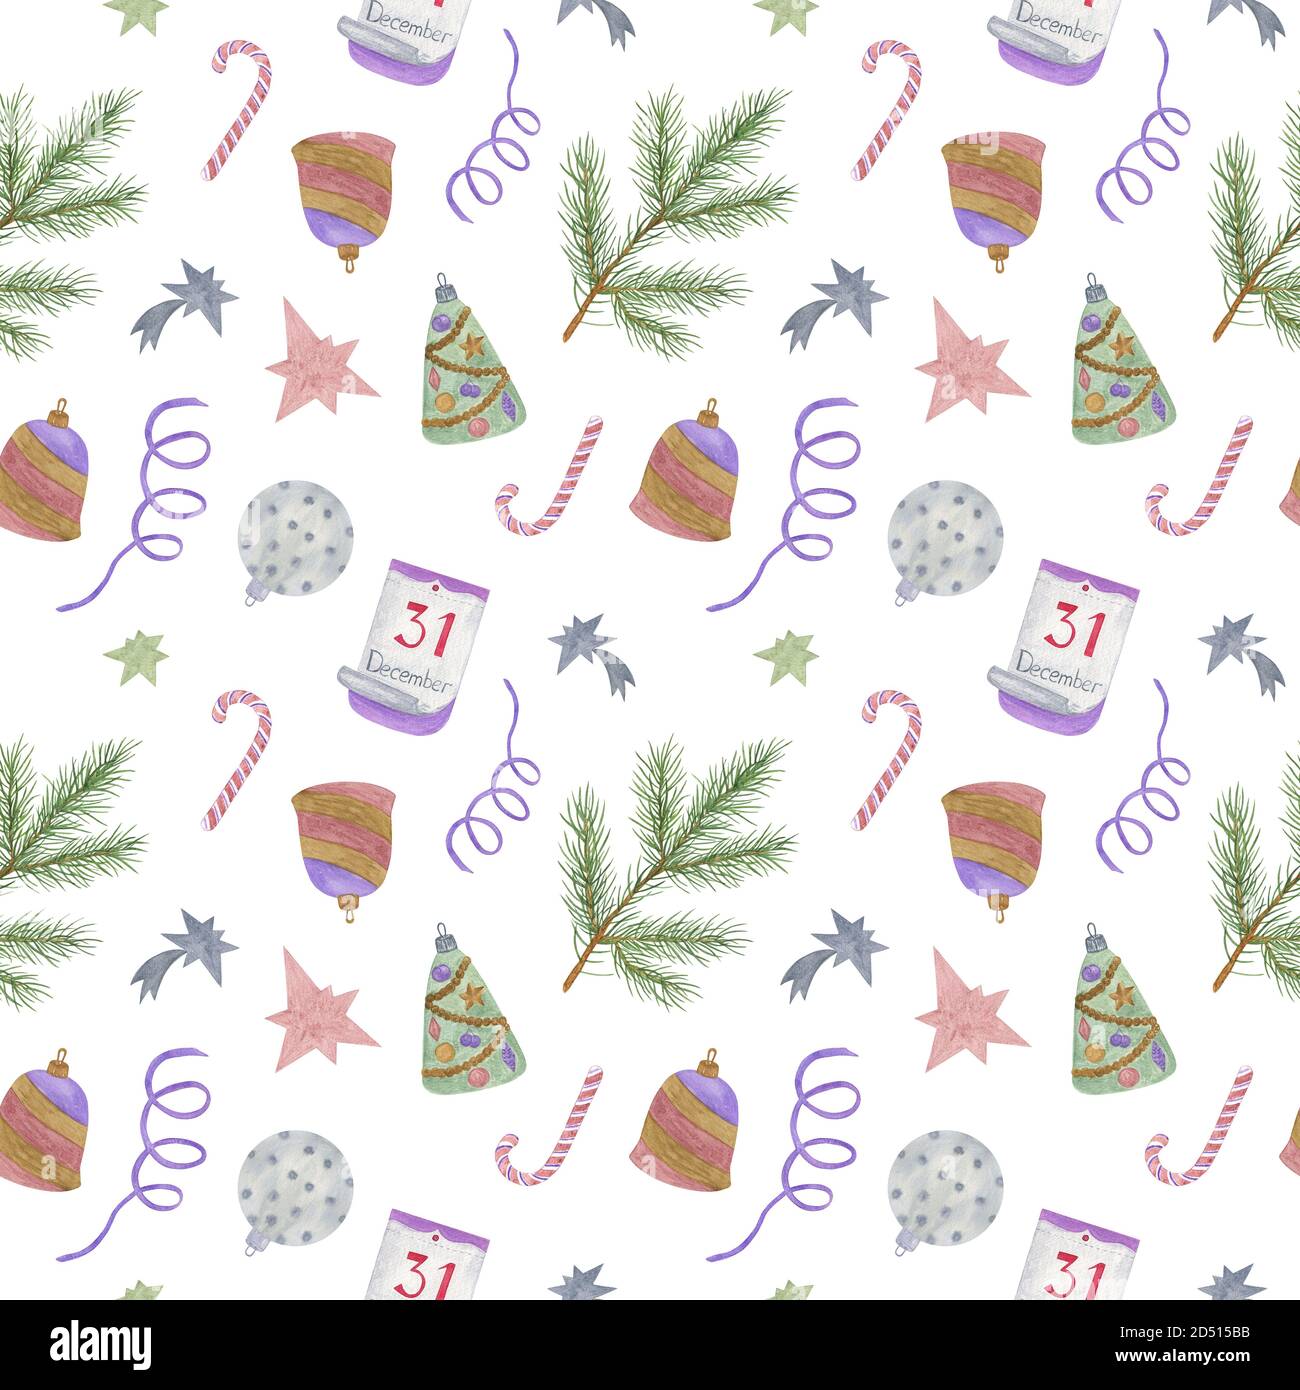 Christmas tree decorations repeat watercolor pattern calendar, fir tree branch, stars, candy cane on white background festive mood pattern for greeting card, banner, winter holiday celebration design Stock Photo